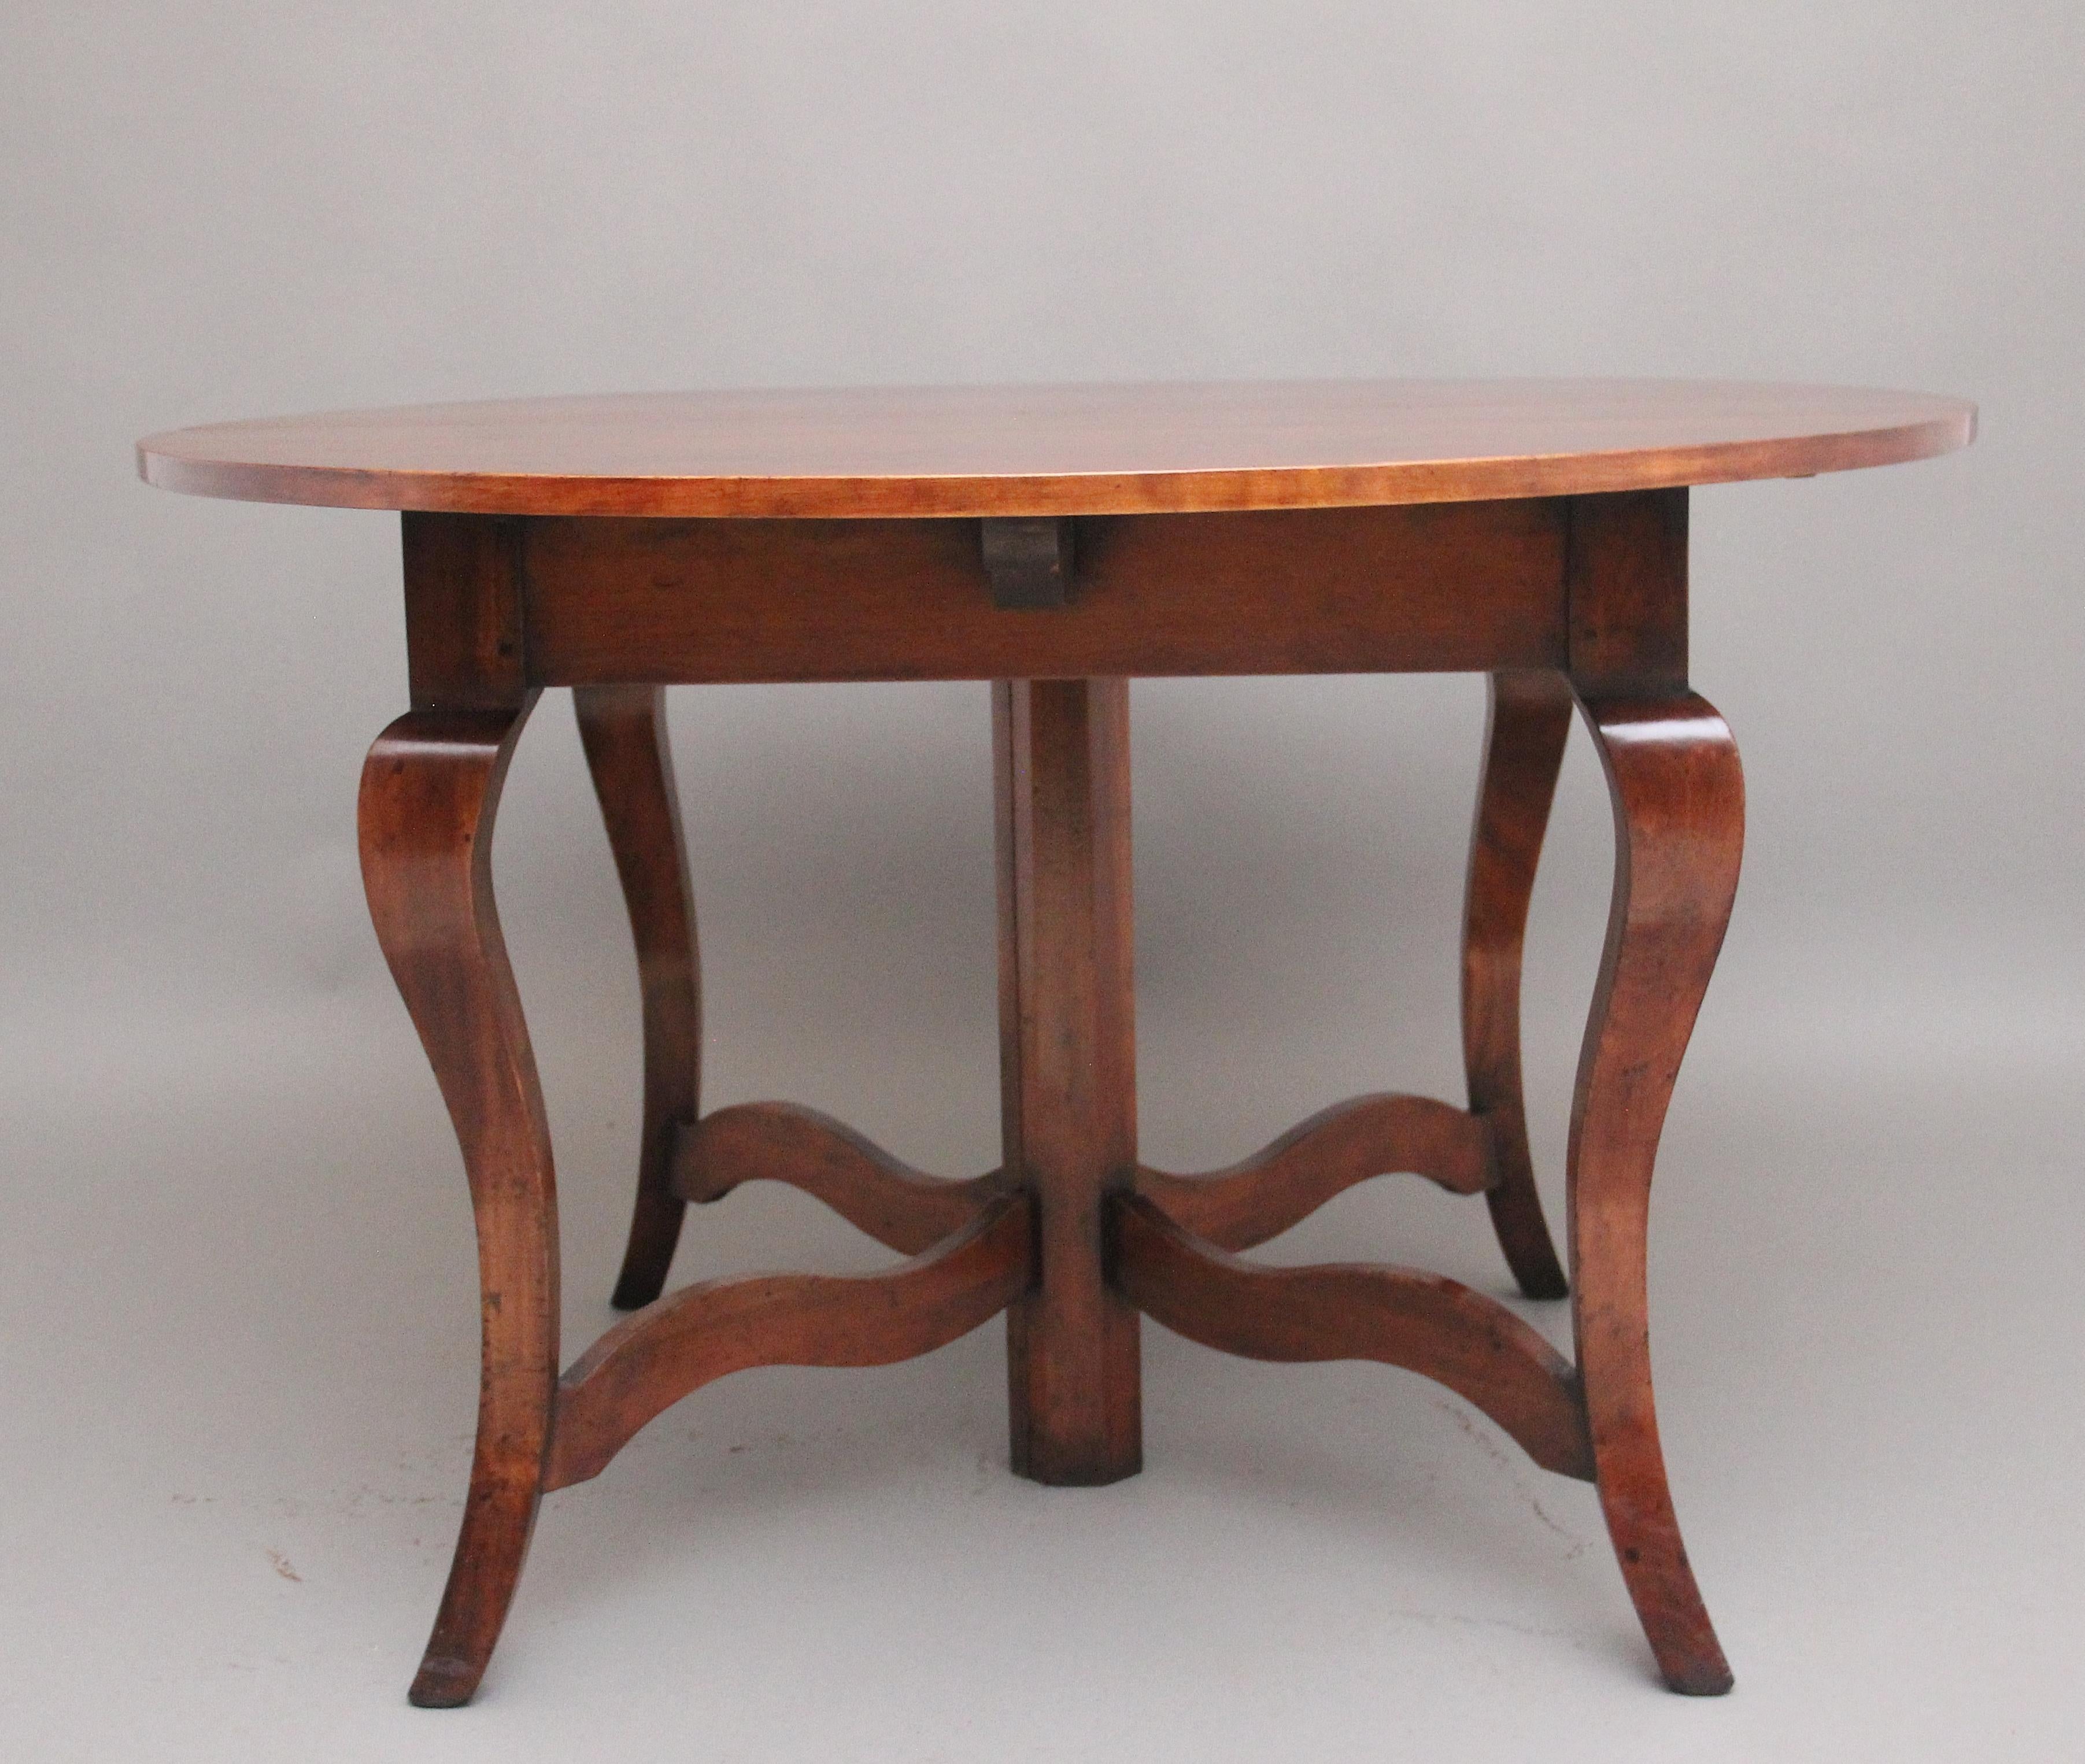 A solid cherry wood extending table with two leaves / extensions in the country French style, the table has a circular shape when closed and once fully extended becomes an oval shaped table,  the table can be used with the two leaves or the one when